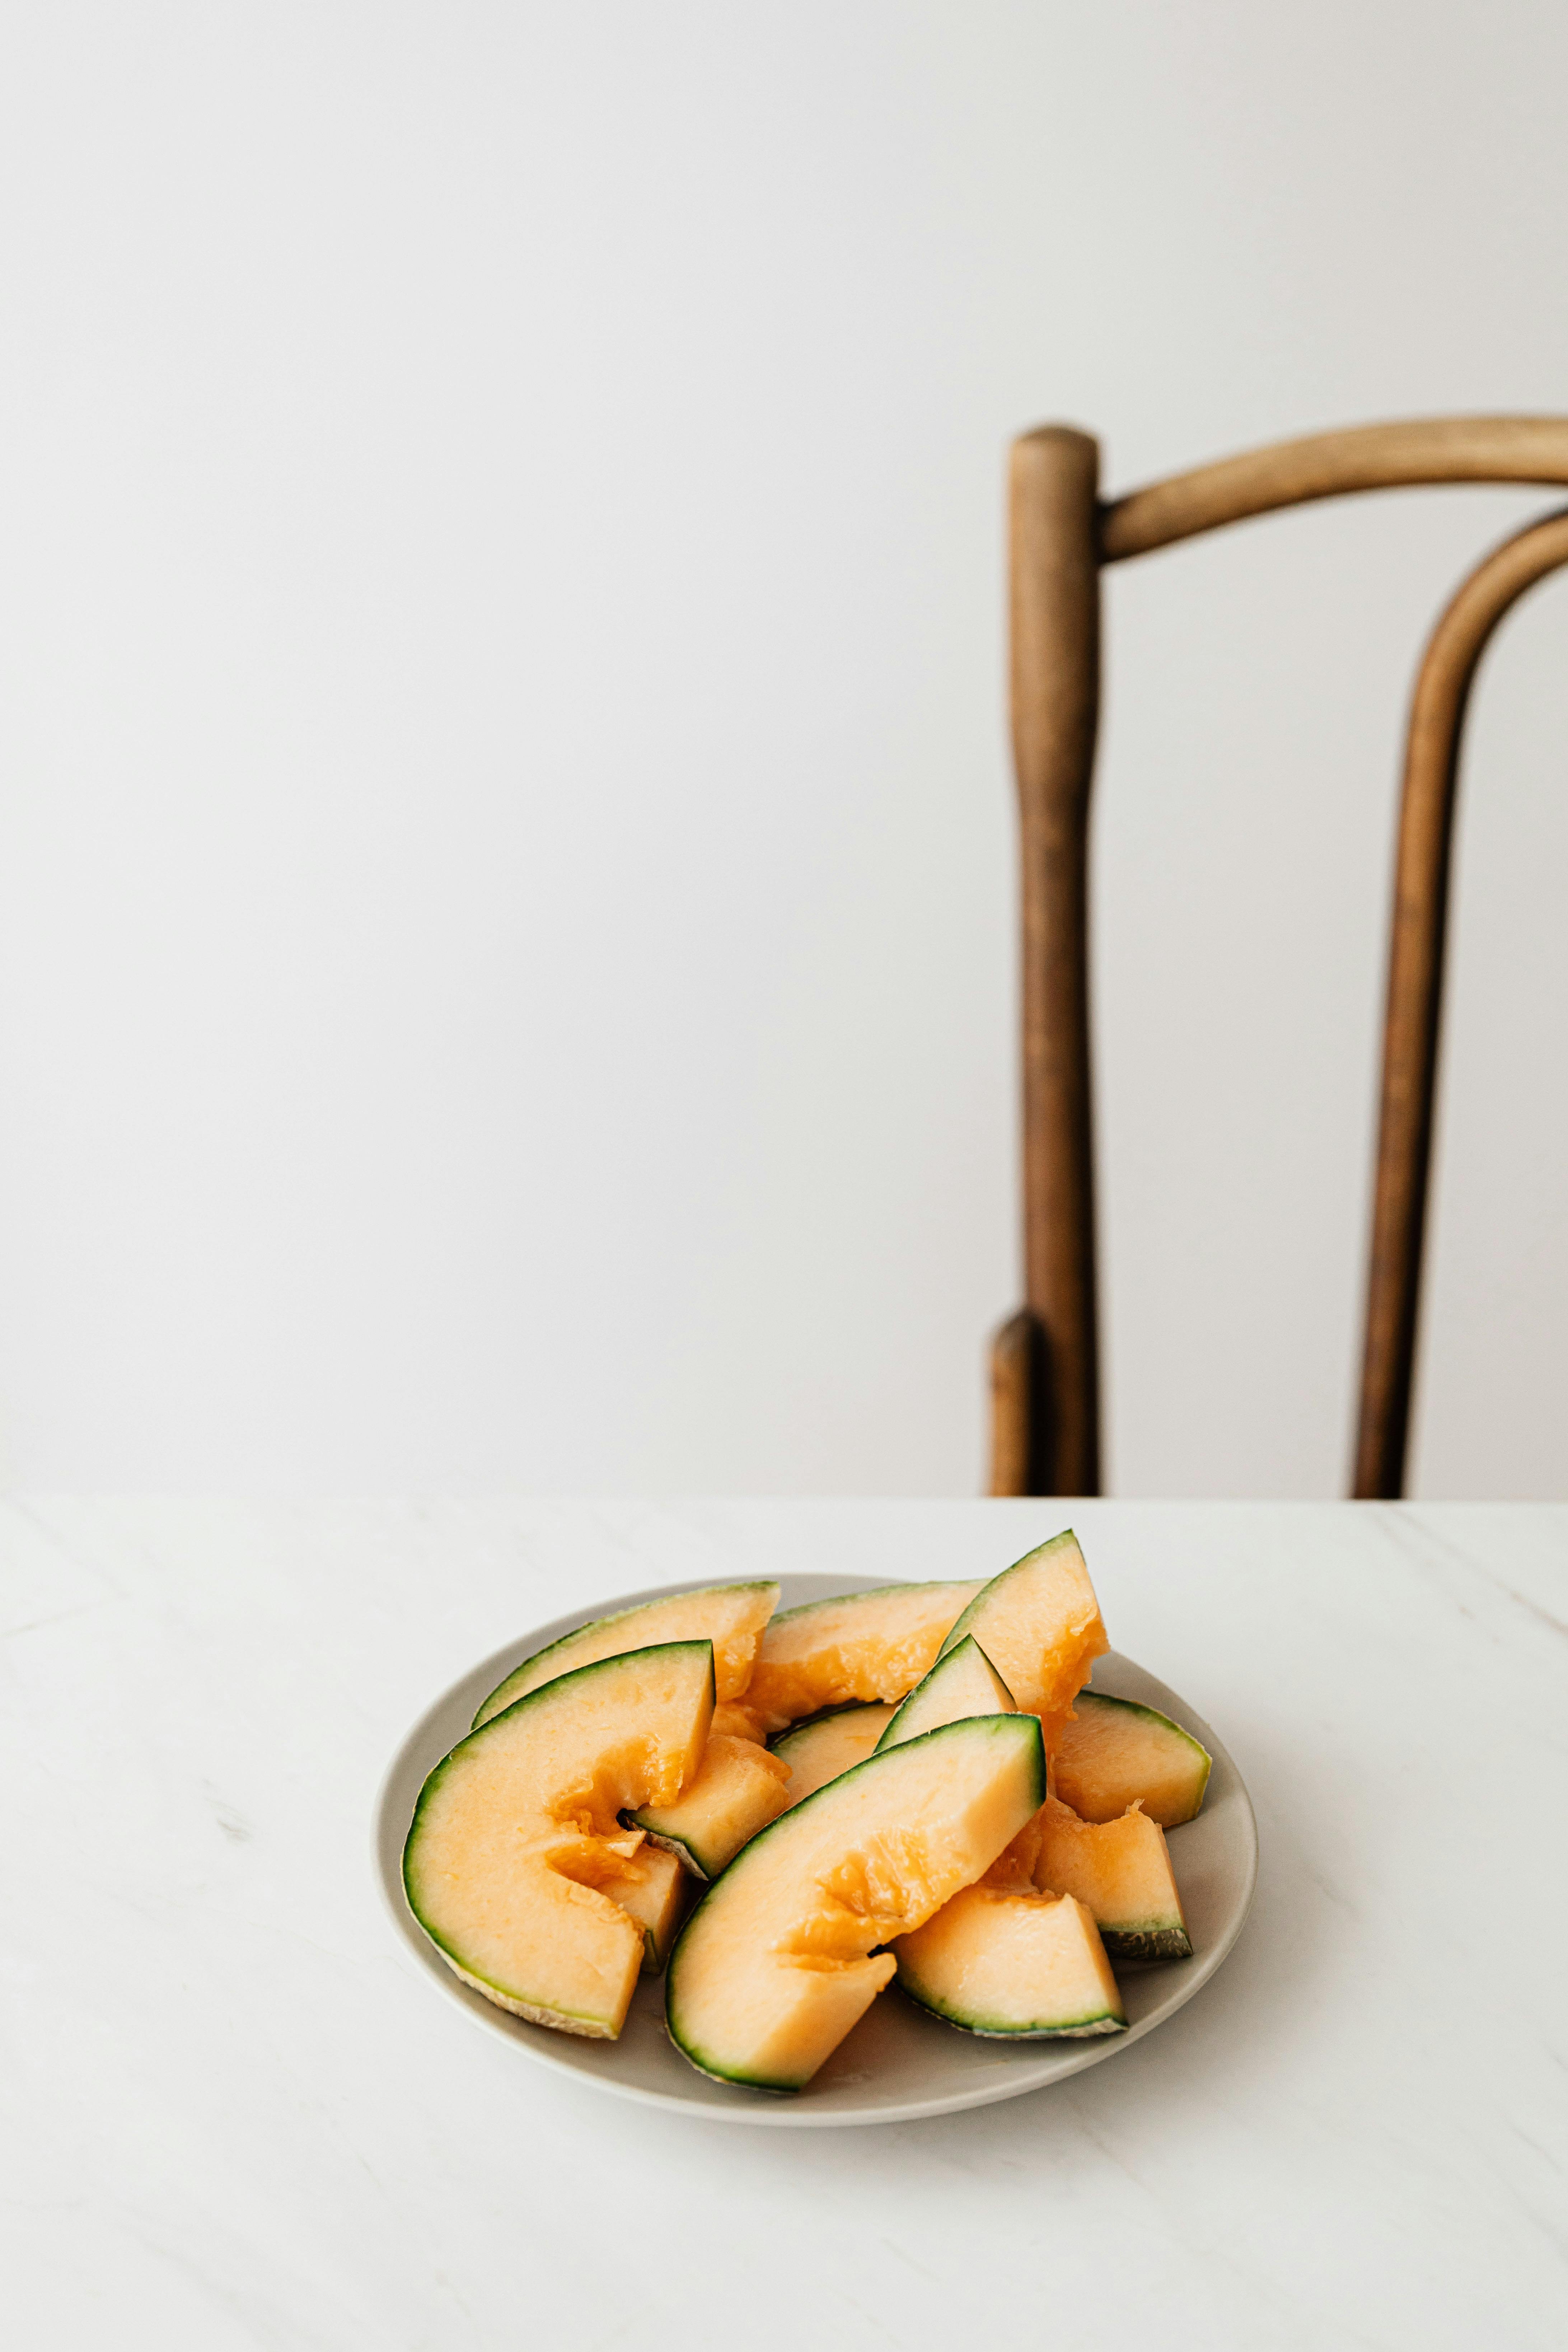 plate of delicious sliced melon placed on white table